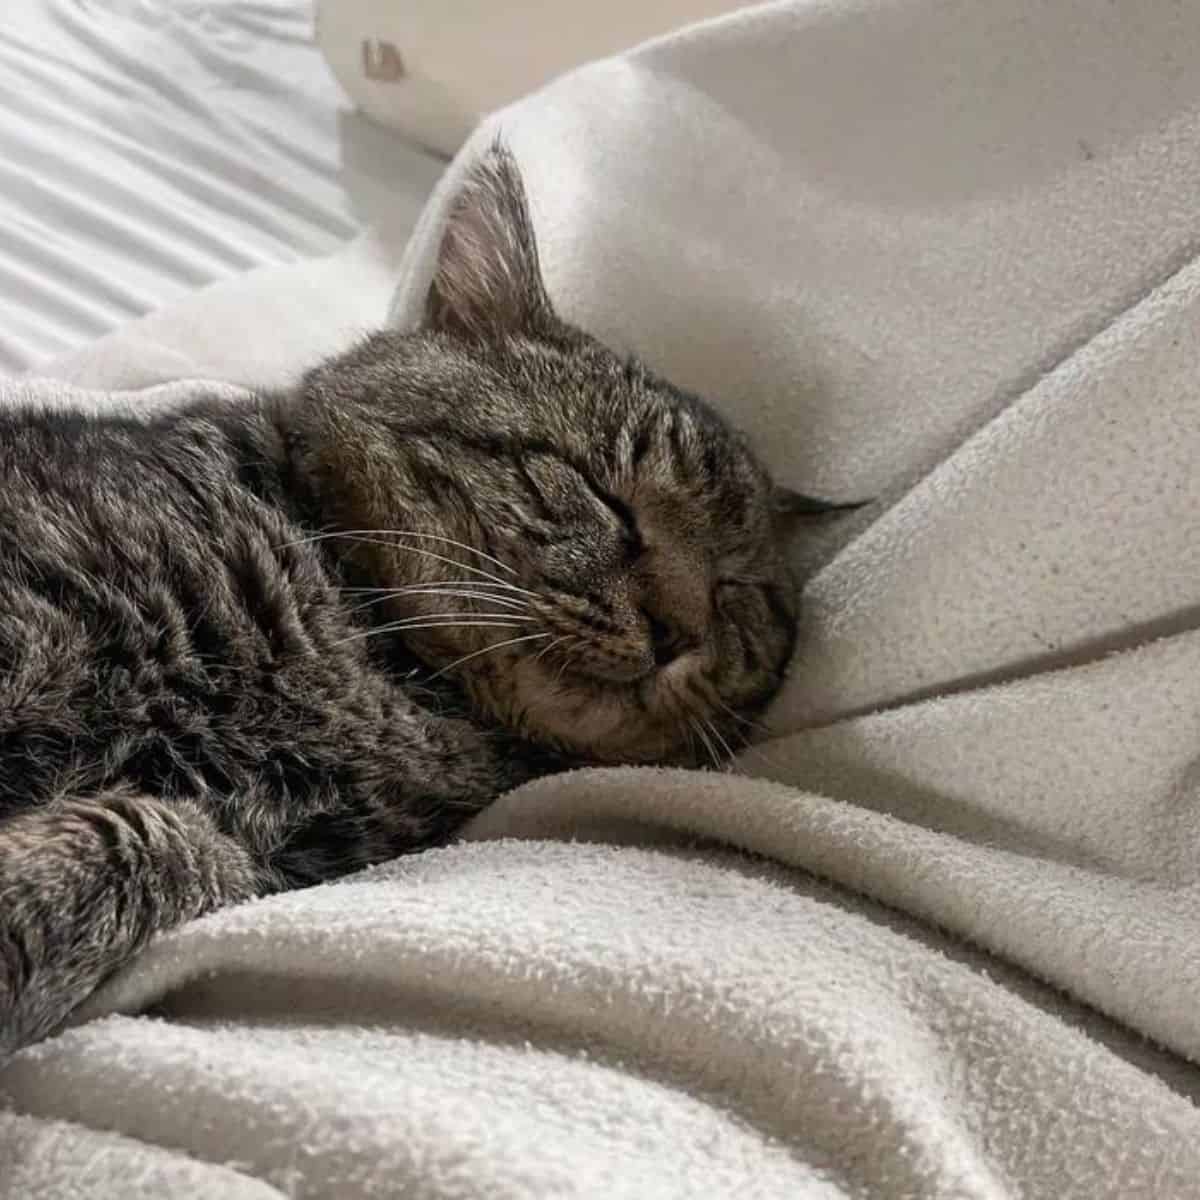 grizzly the cat sleeping comfortably in new home